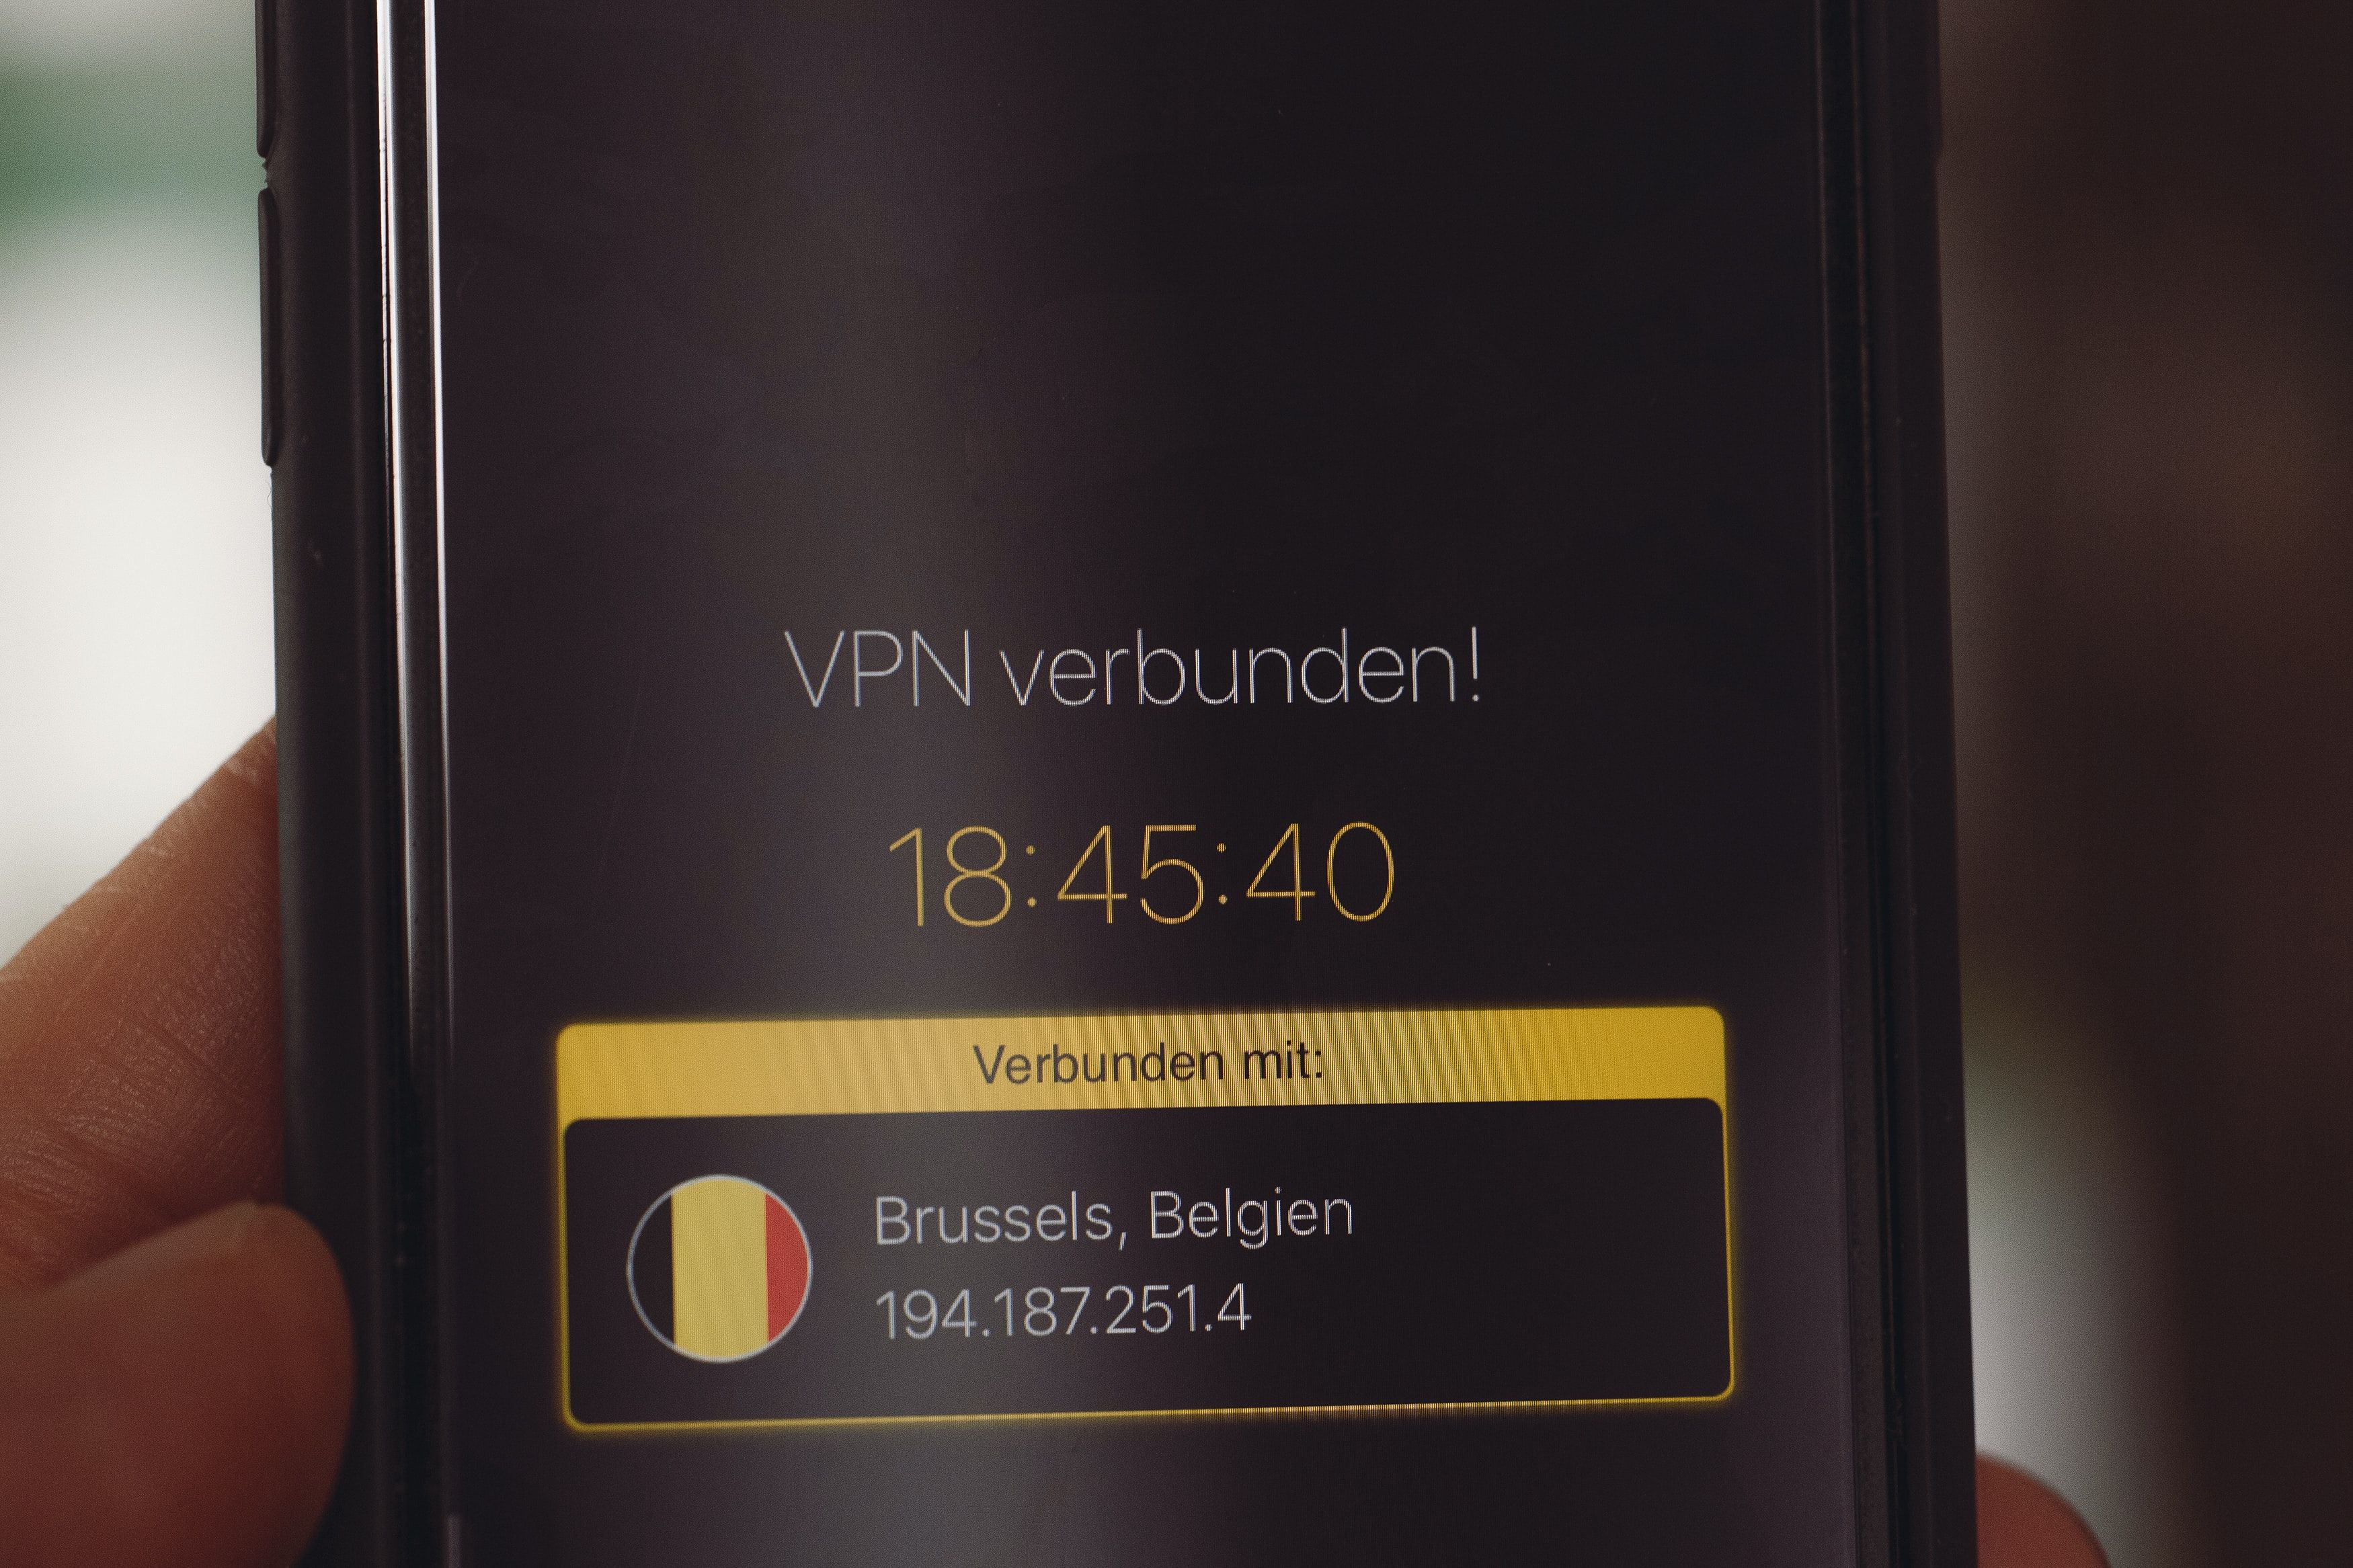 Photo of a VPN connection on a phone screen, written in German